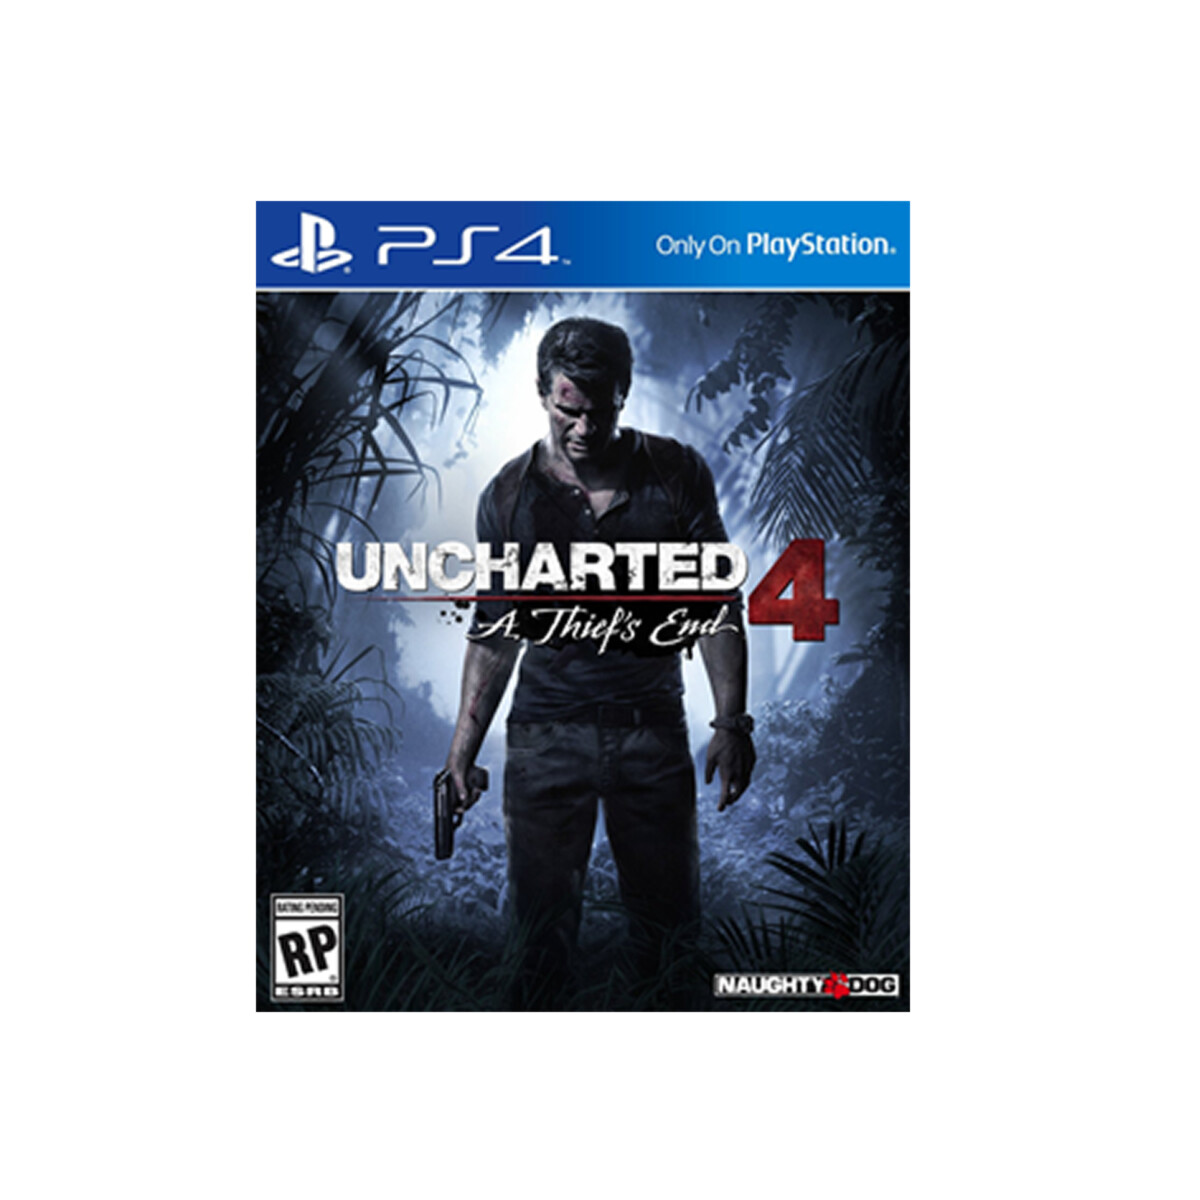 PS4 UNCHARTED 4 